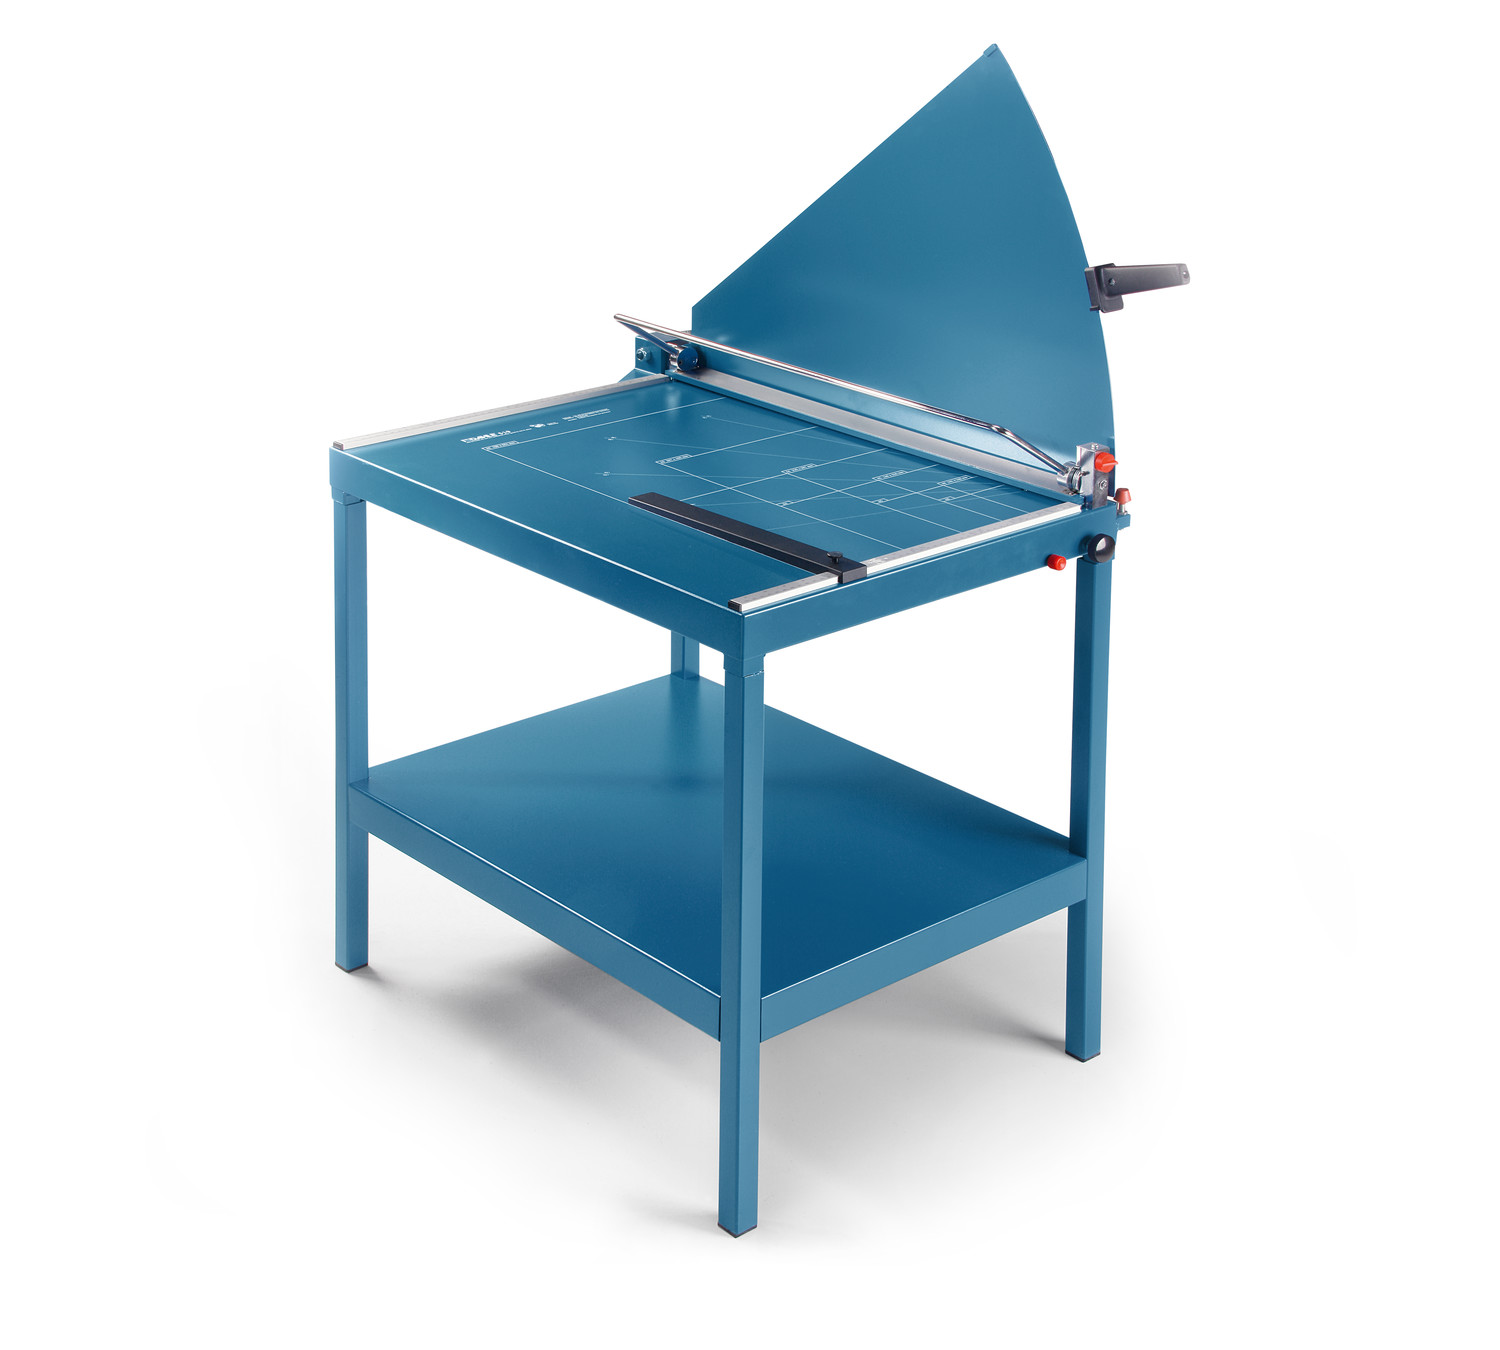 Sturdy stand for optimum working height – available as accessory for models 519, 569, 589, 599